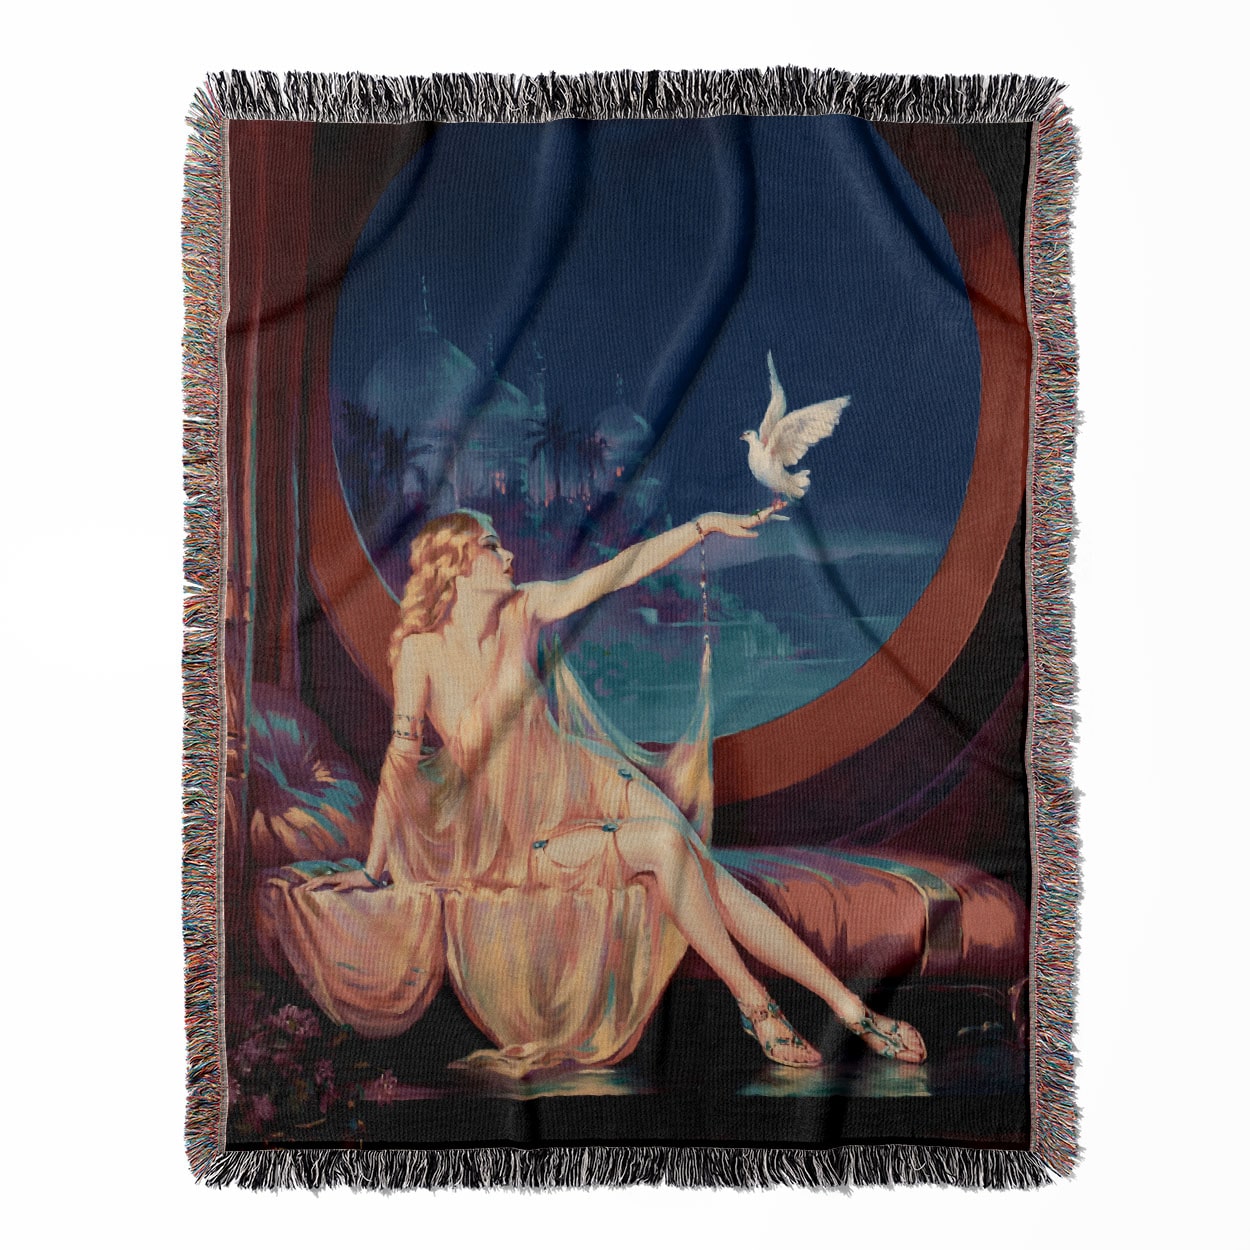 Art Nouveau woven throw blanket, made with 100% cotton, providing a soft and cozy texture in a sultana art style for home decor.